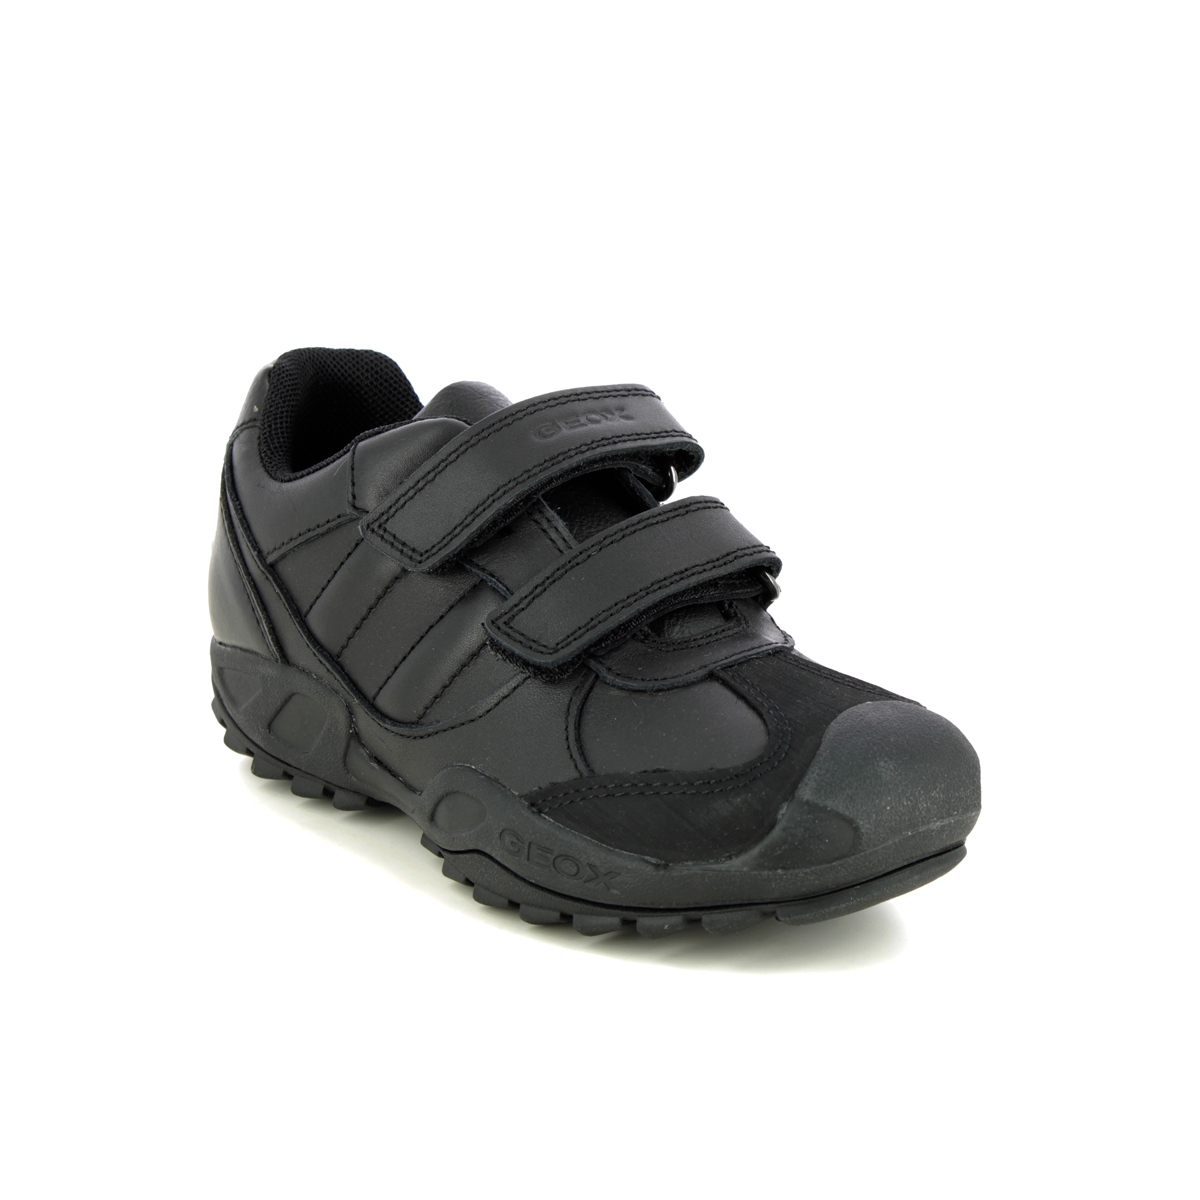 Geox - Savage Low Cut (Black Leather) J841Vb-C9999 In Size 40 In Plain Black Leather For School For kids